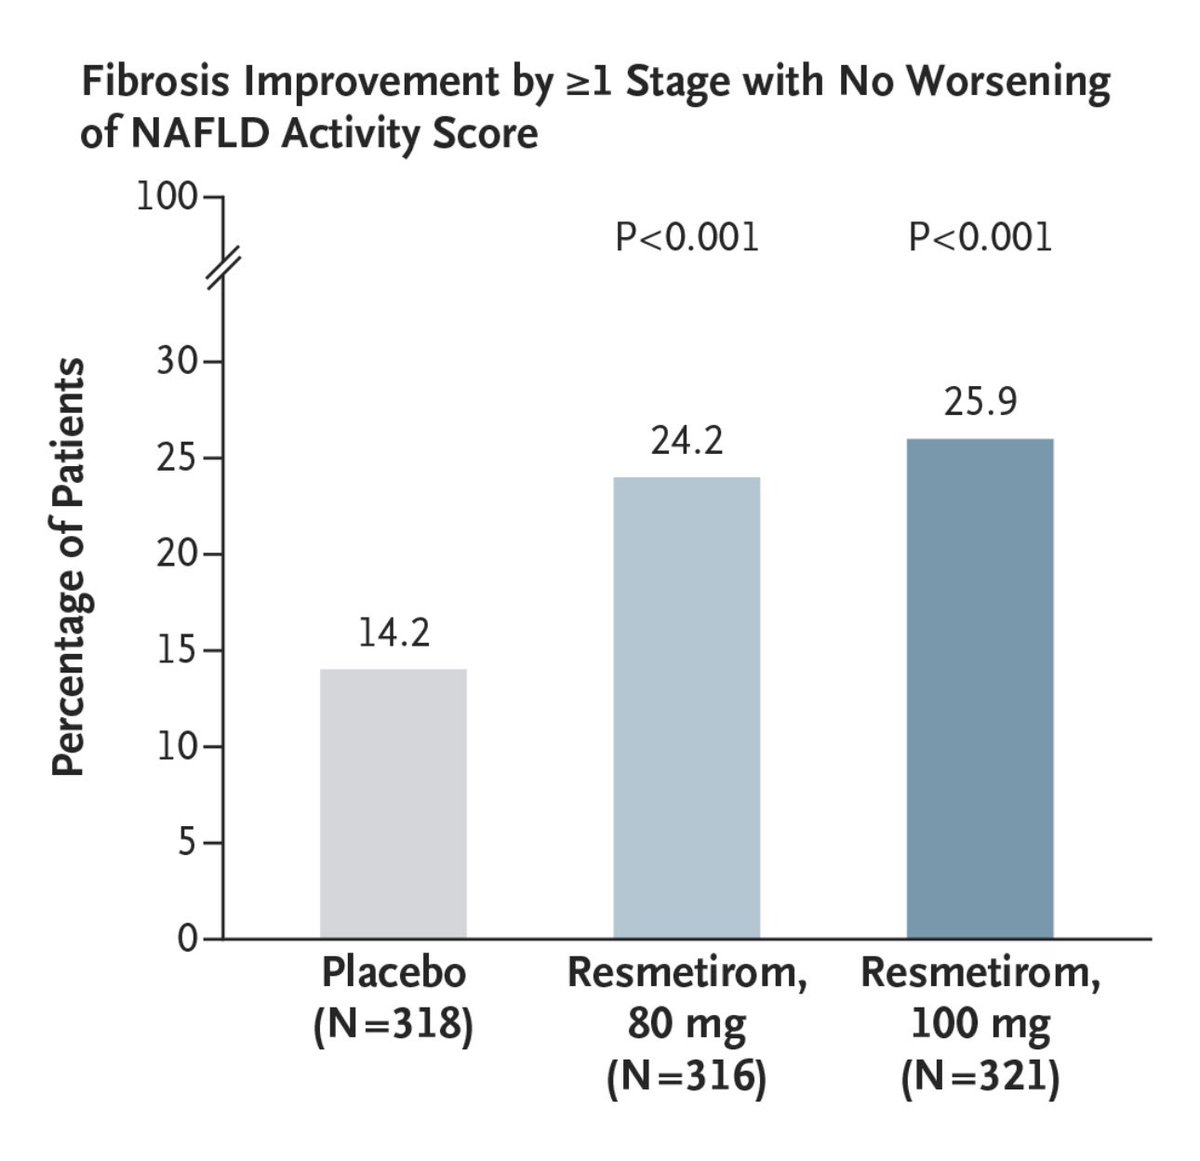 Good news for MASLD just published in the @NEJM ! Resmetirom, a selective agonist of THR-β, reduces fibrosis and steatohepatitis. Once approved, real world data will be important. nej.md/4bHd7iT #livertwitter #MedX